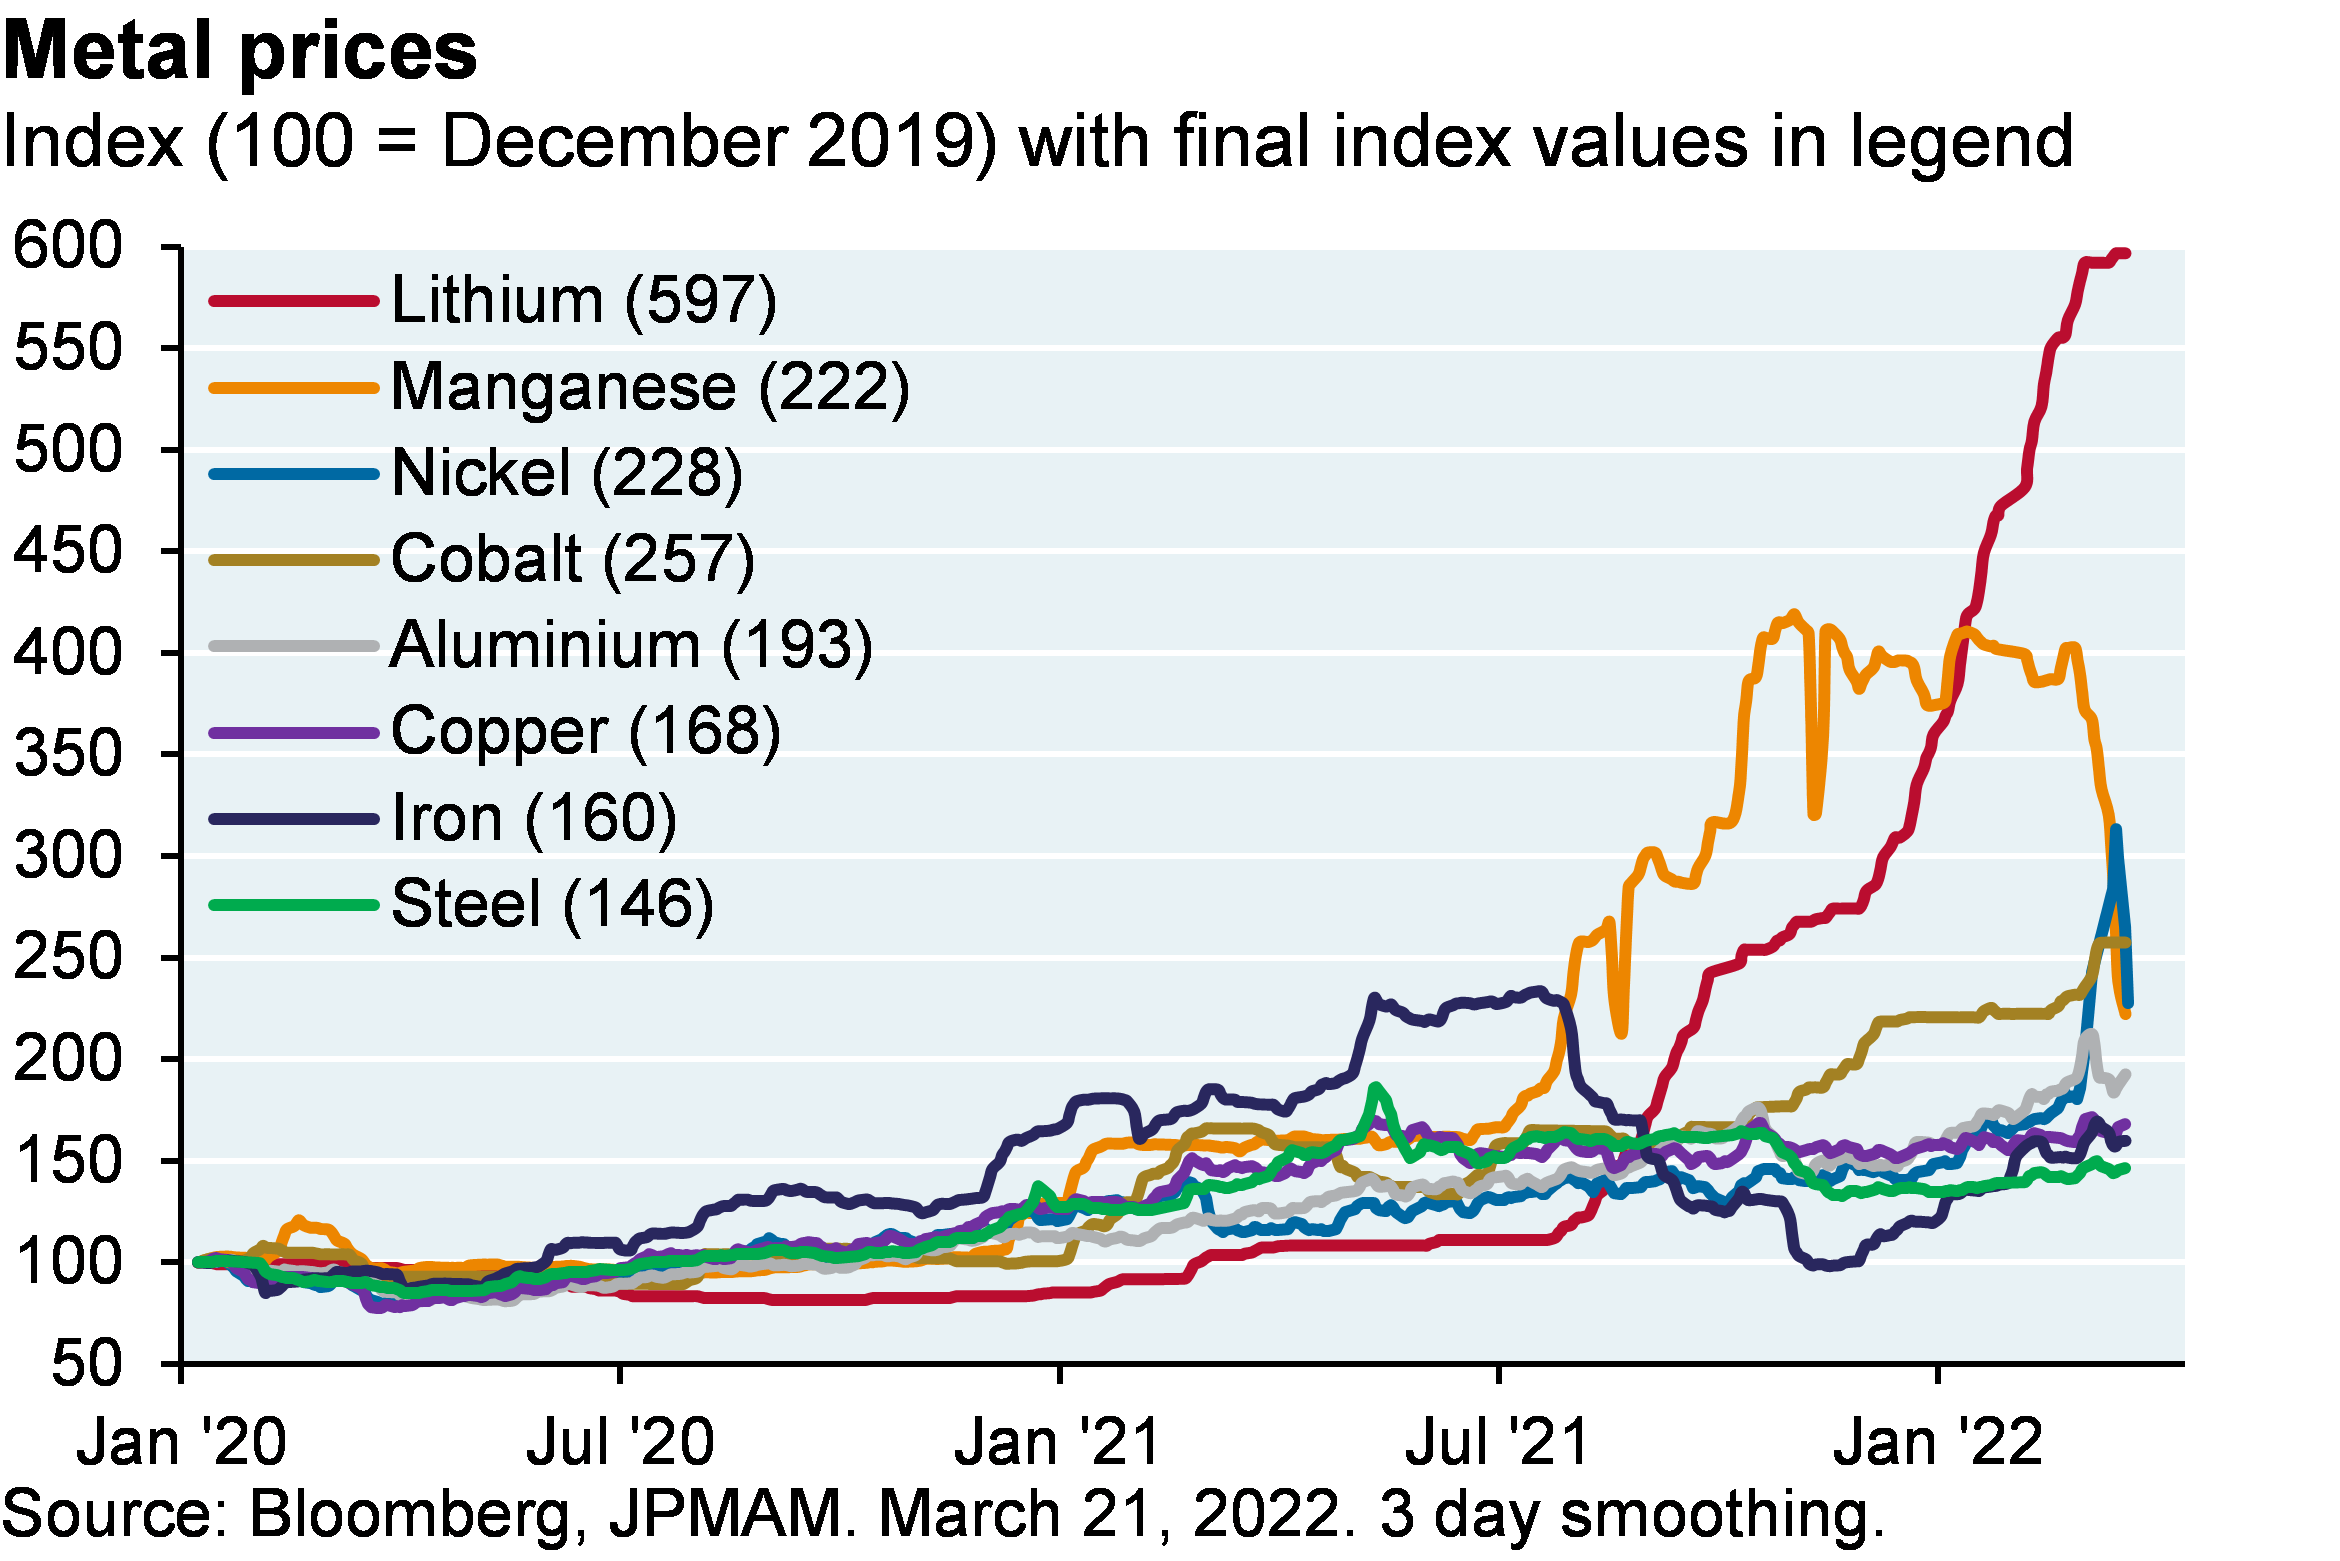 Line chart shows metal prices indexed to December 2019. Lithium, Manganese, nickel, cobalt and aluminum prices have risen 2-6x from then to 2022